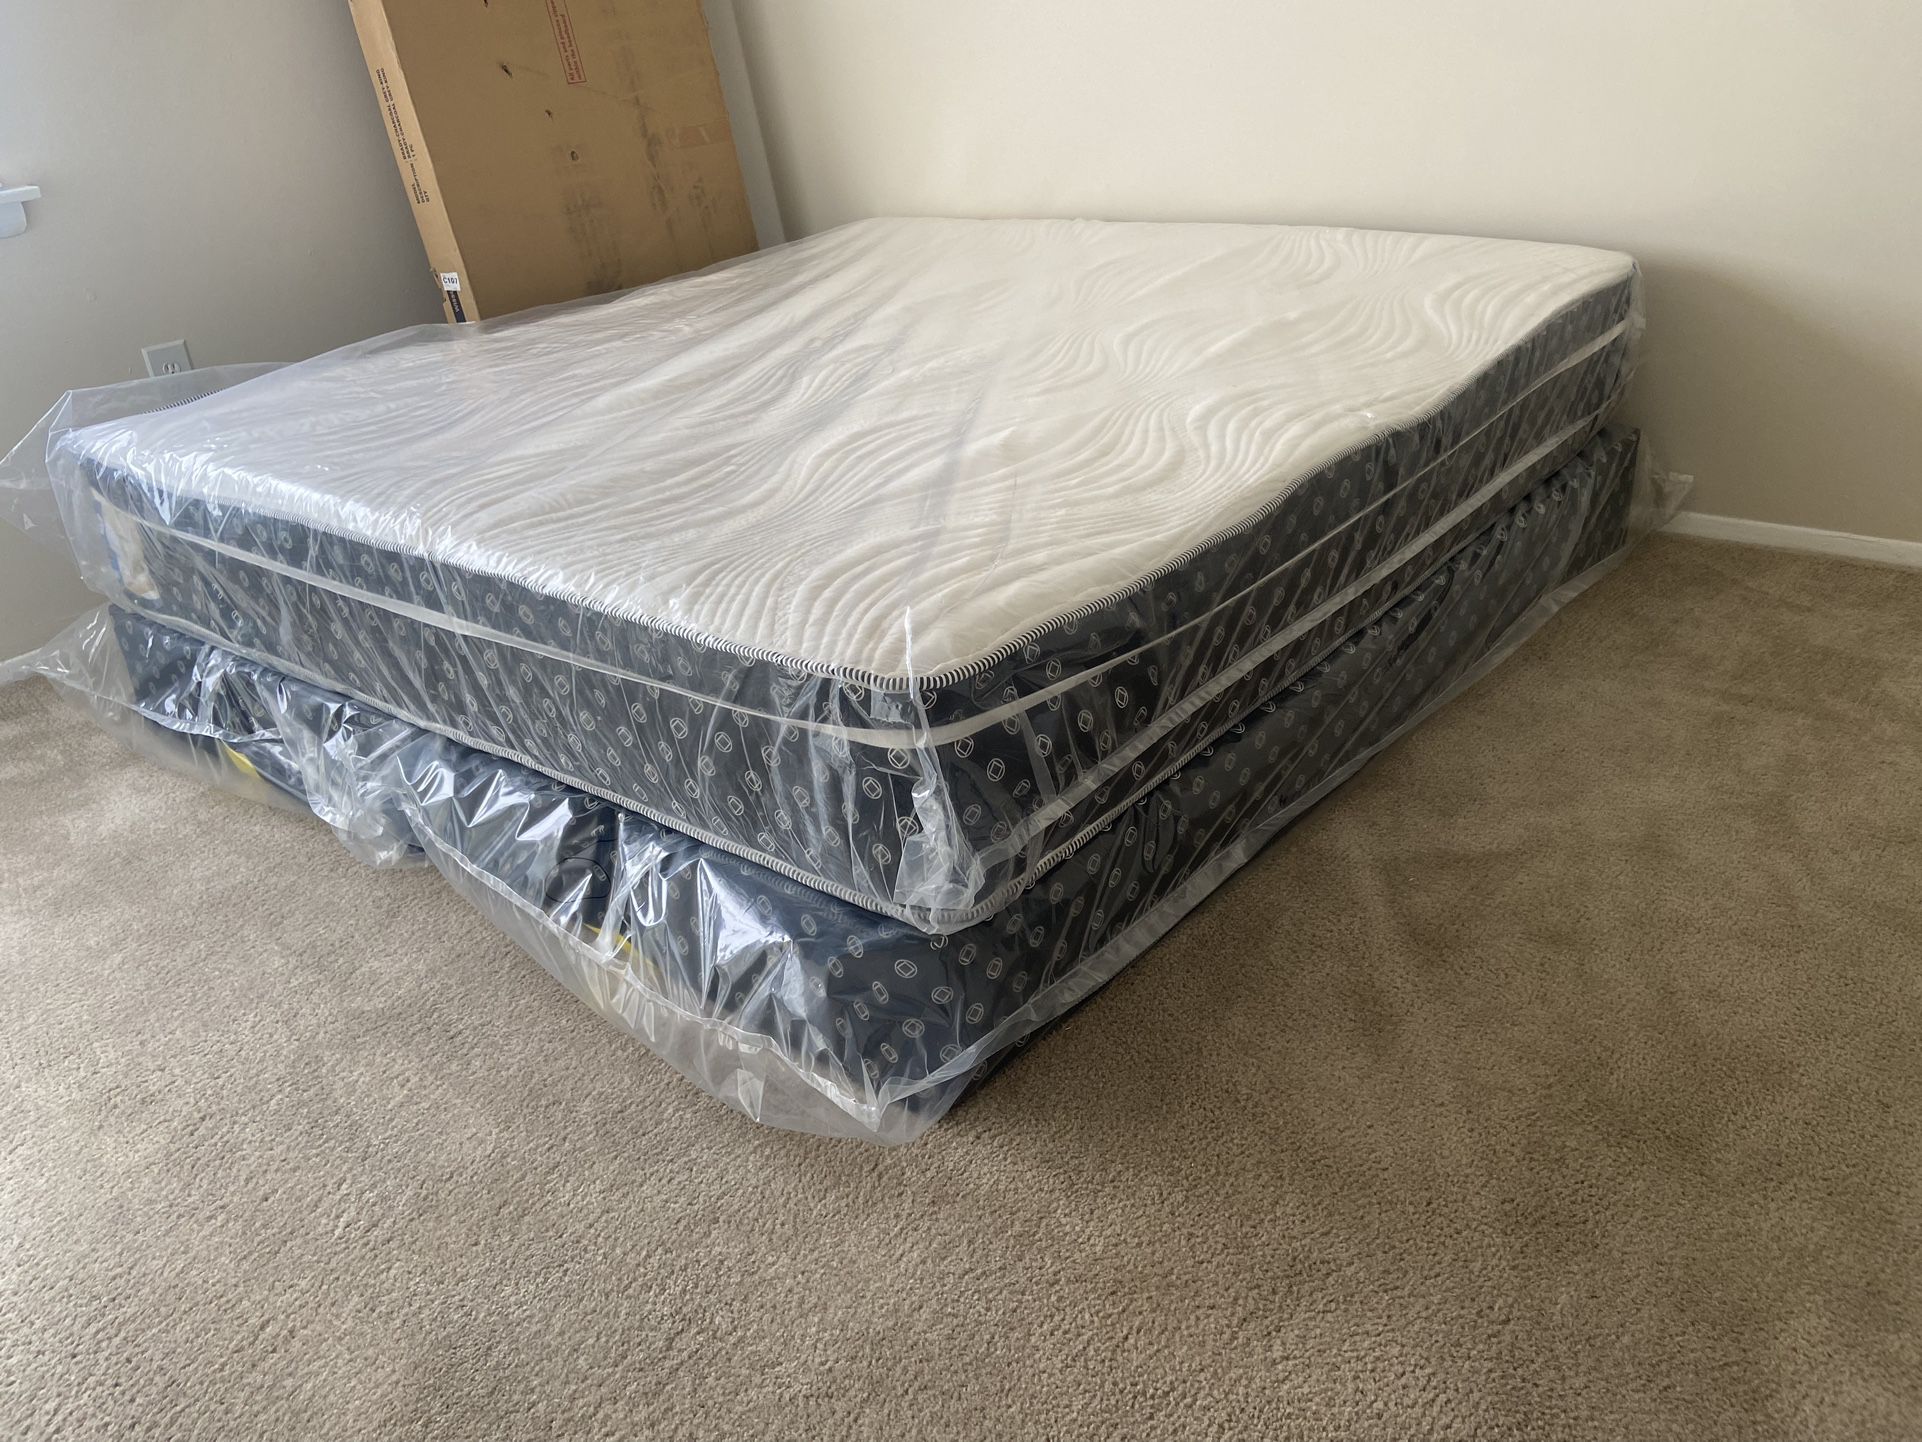 Queen Mattress Come With Free Box Spring  - Free Delivery 🚚 Today To Reasonable Distance